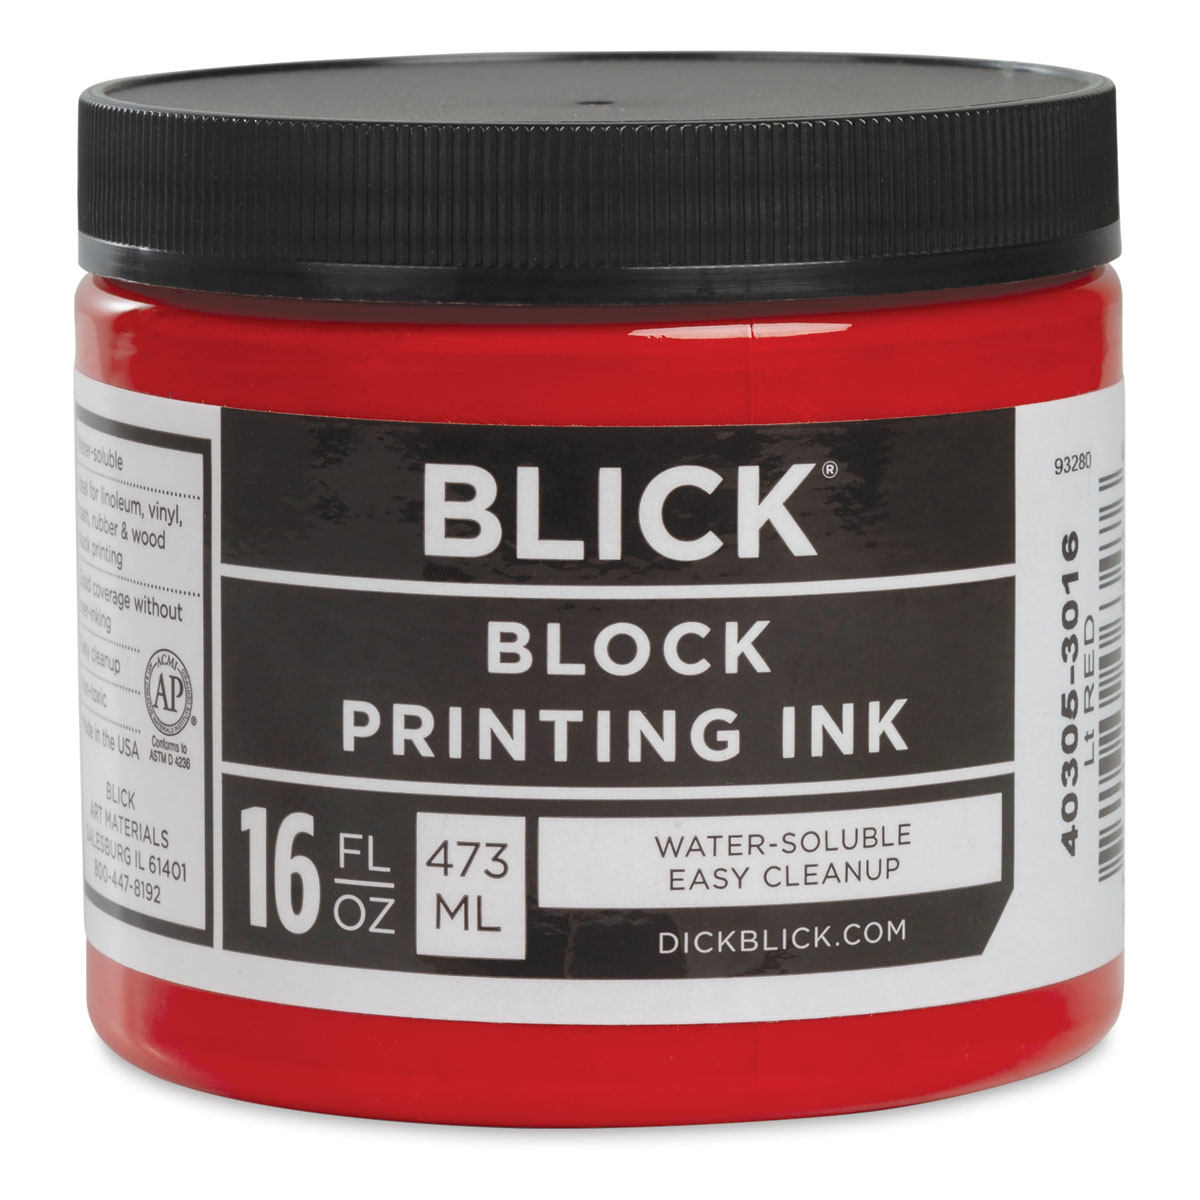 Water-Soluble Block Printing Ink - Light Red